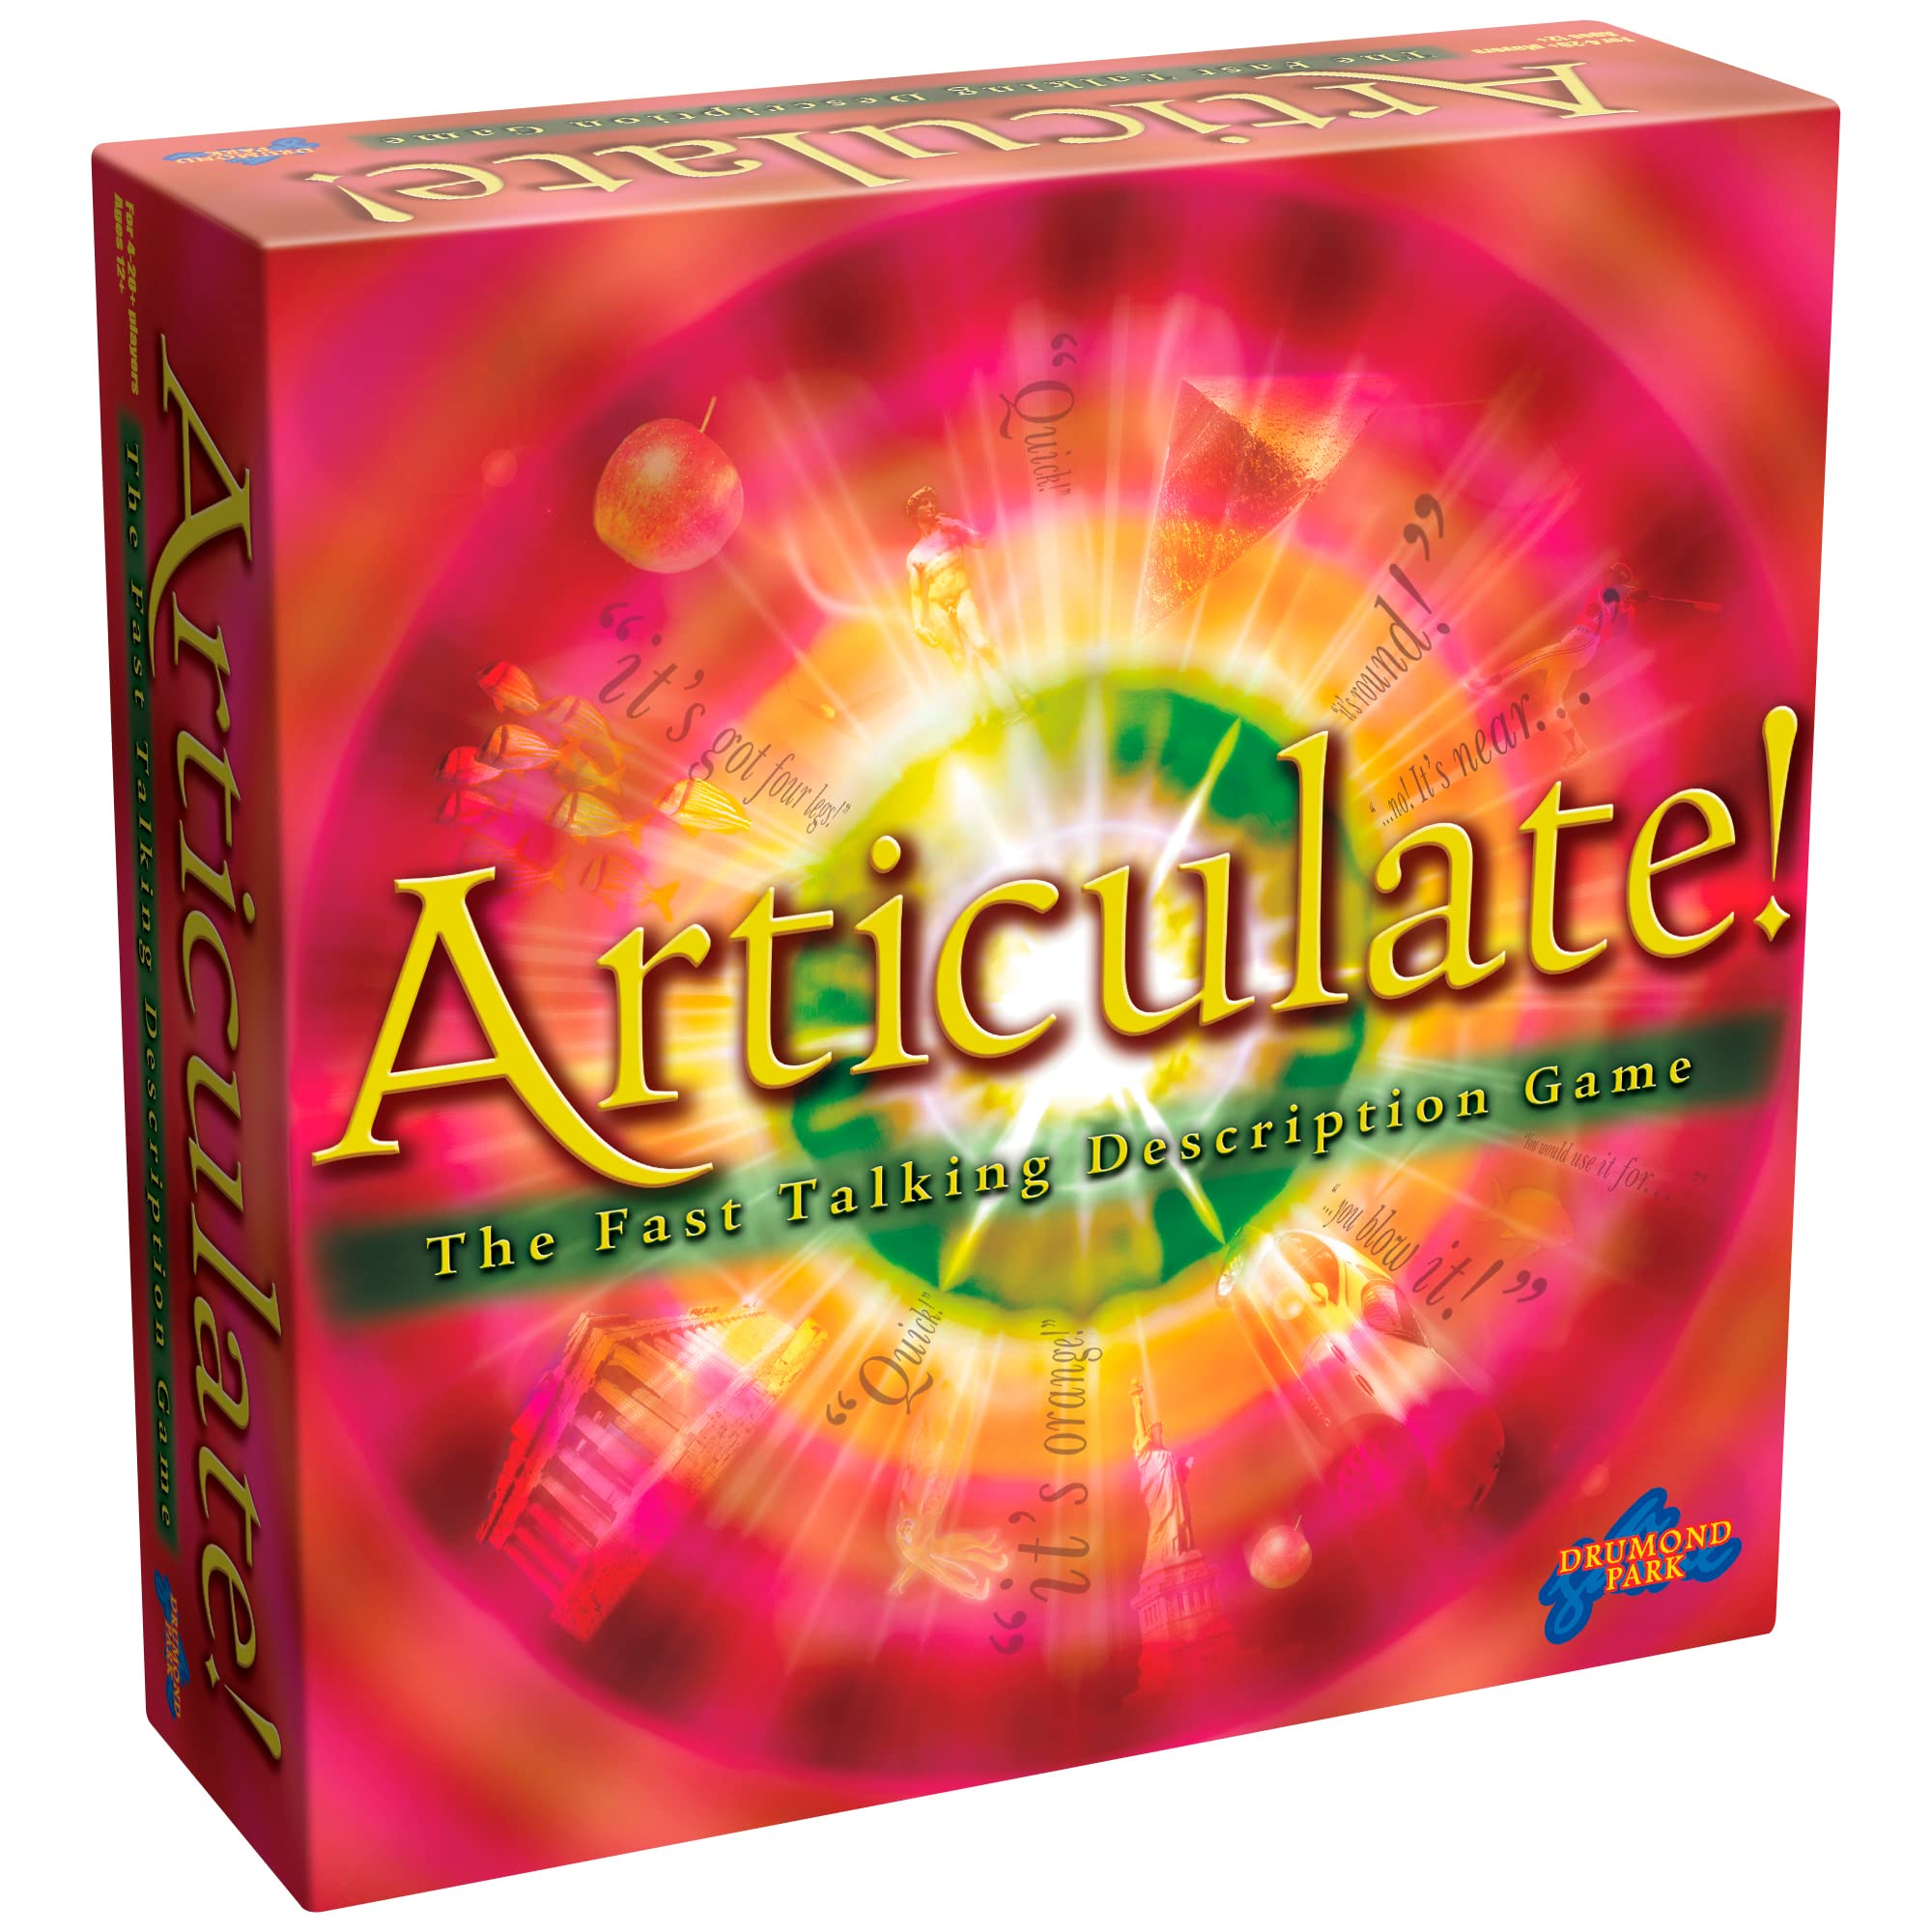 Drumond Park Articulate Family Board Game, The Fast Talking Description Game, Family Games for Adults and Kids Suitable from 12+ Years